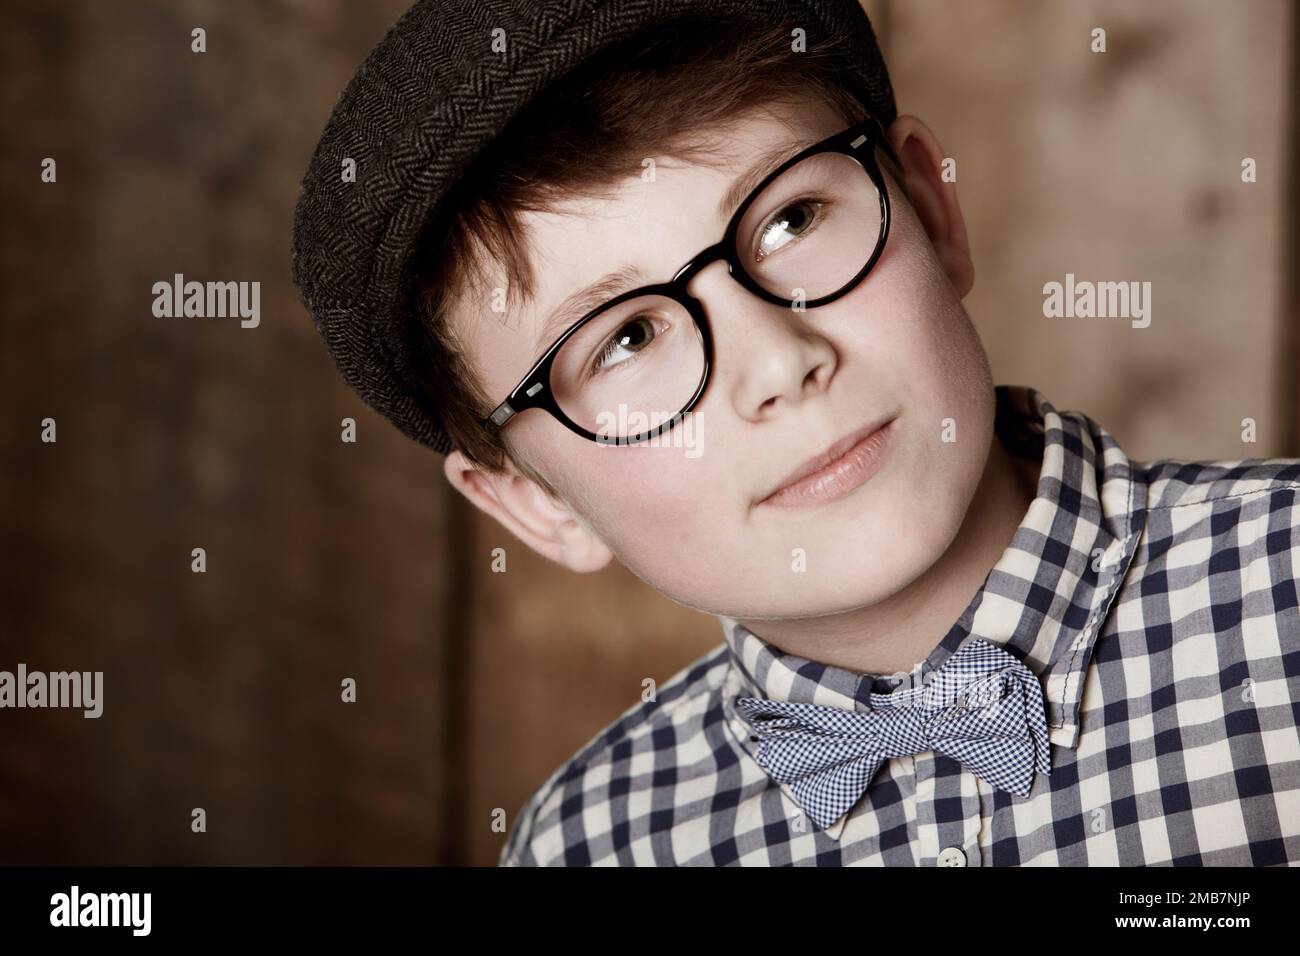 Intelligent and thoughtful. Young boy in retro clothing wearing spectacles while looking away. Stock Photo